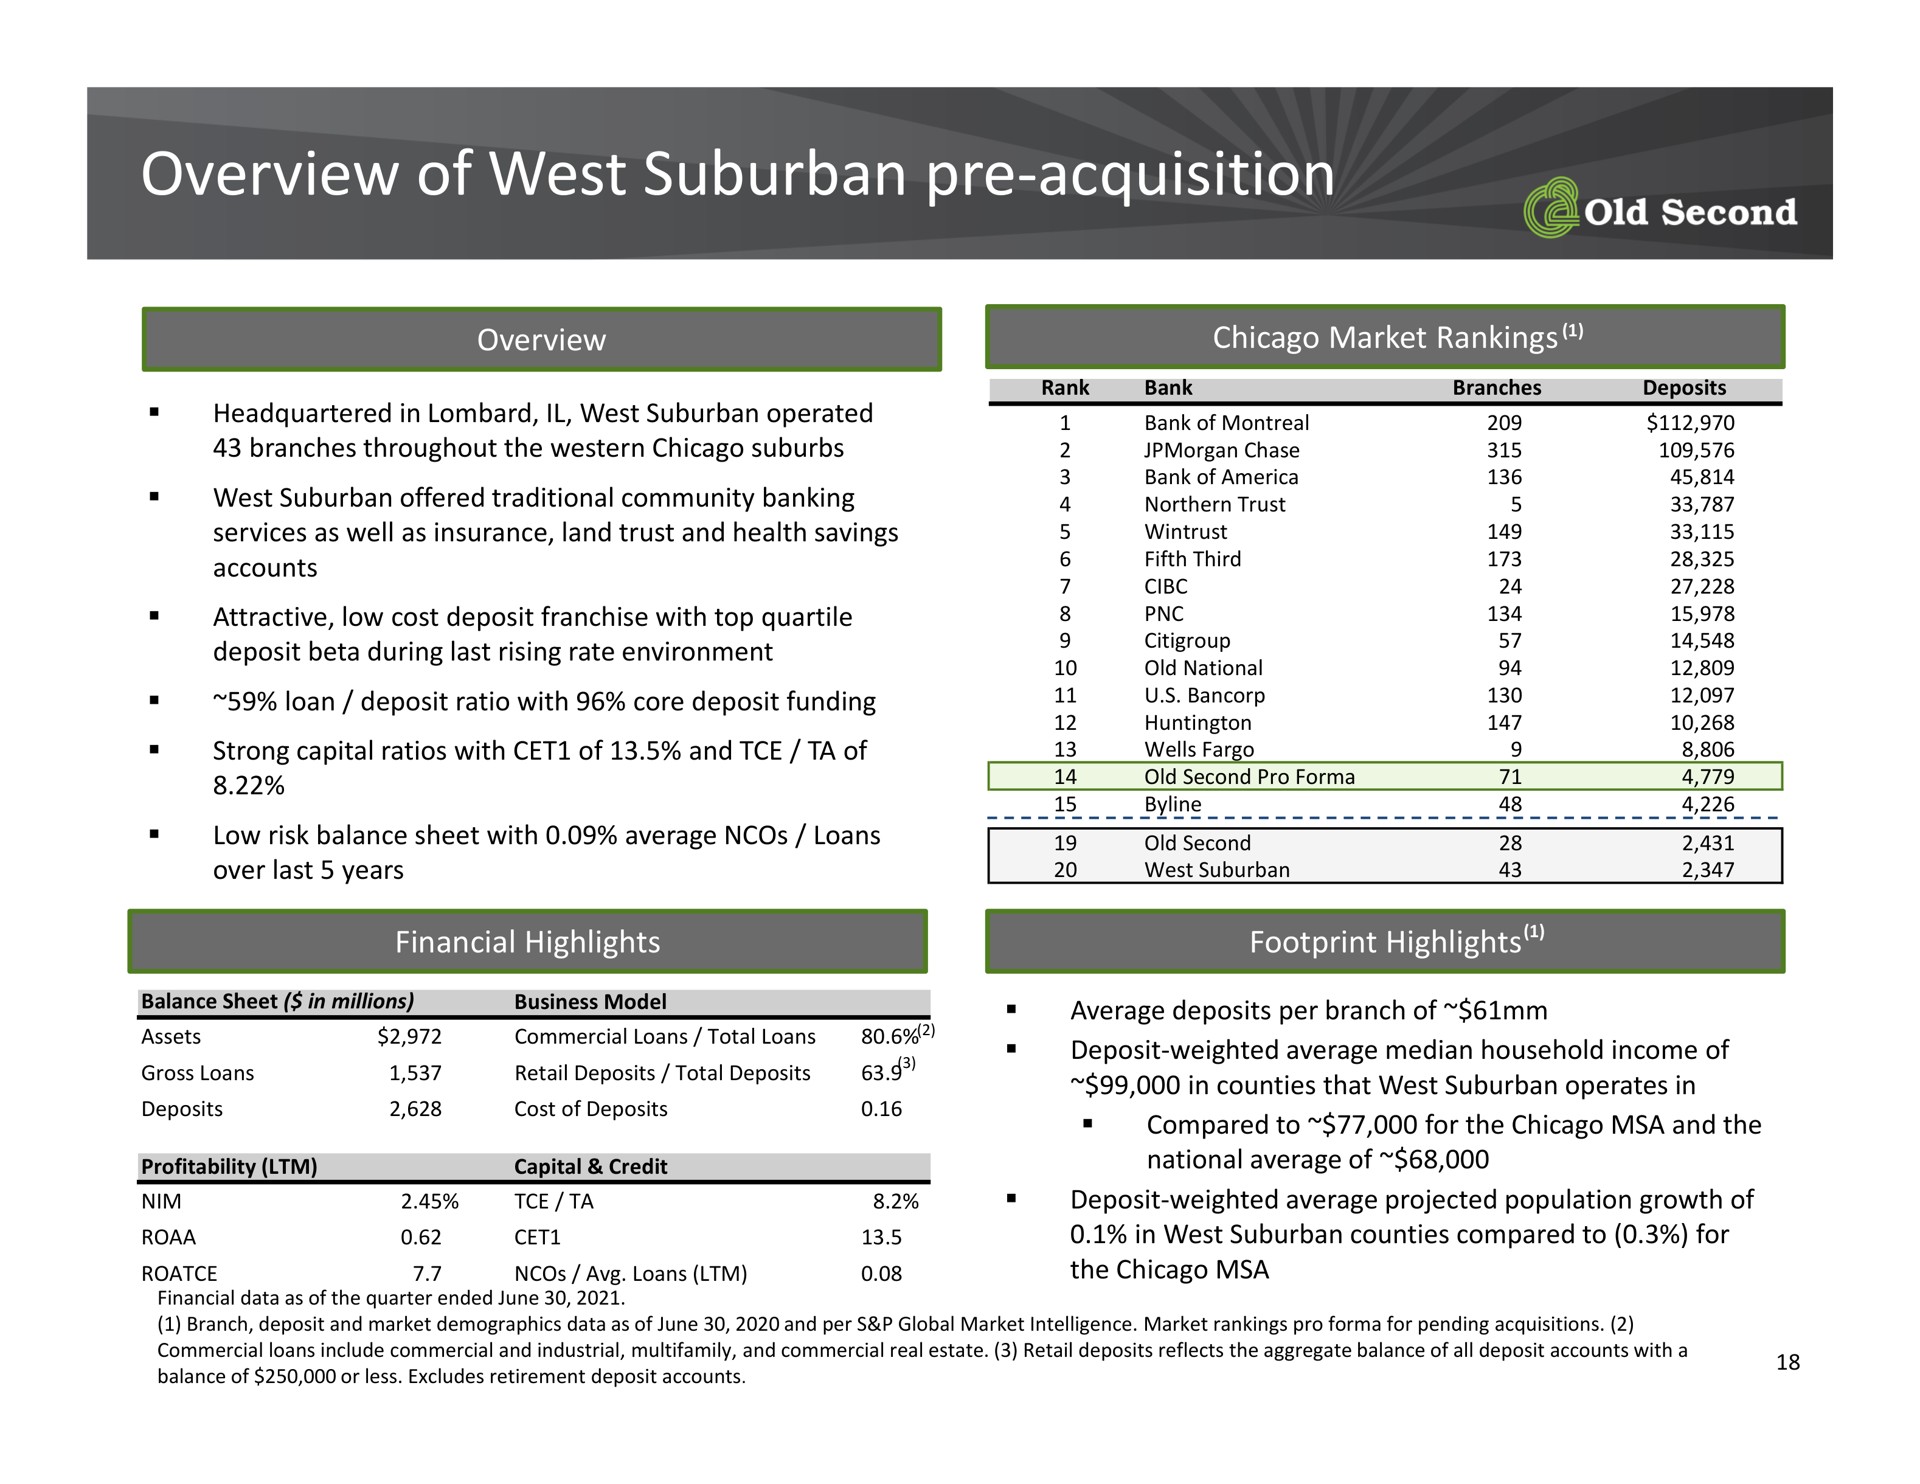 overview of west suburban acquisition acquisition | Old Second Bancorp